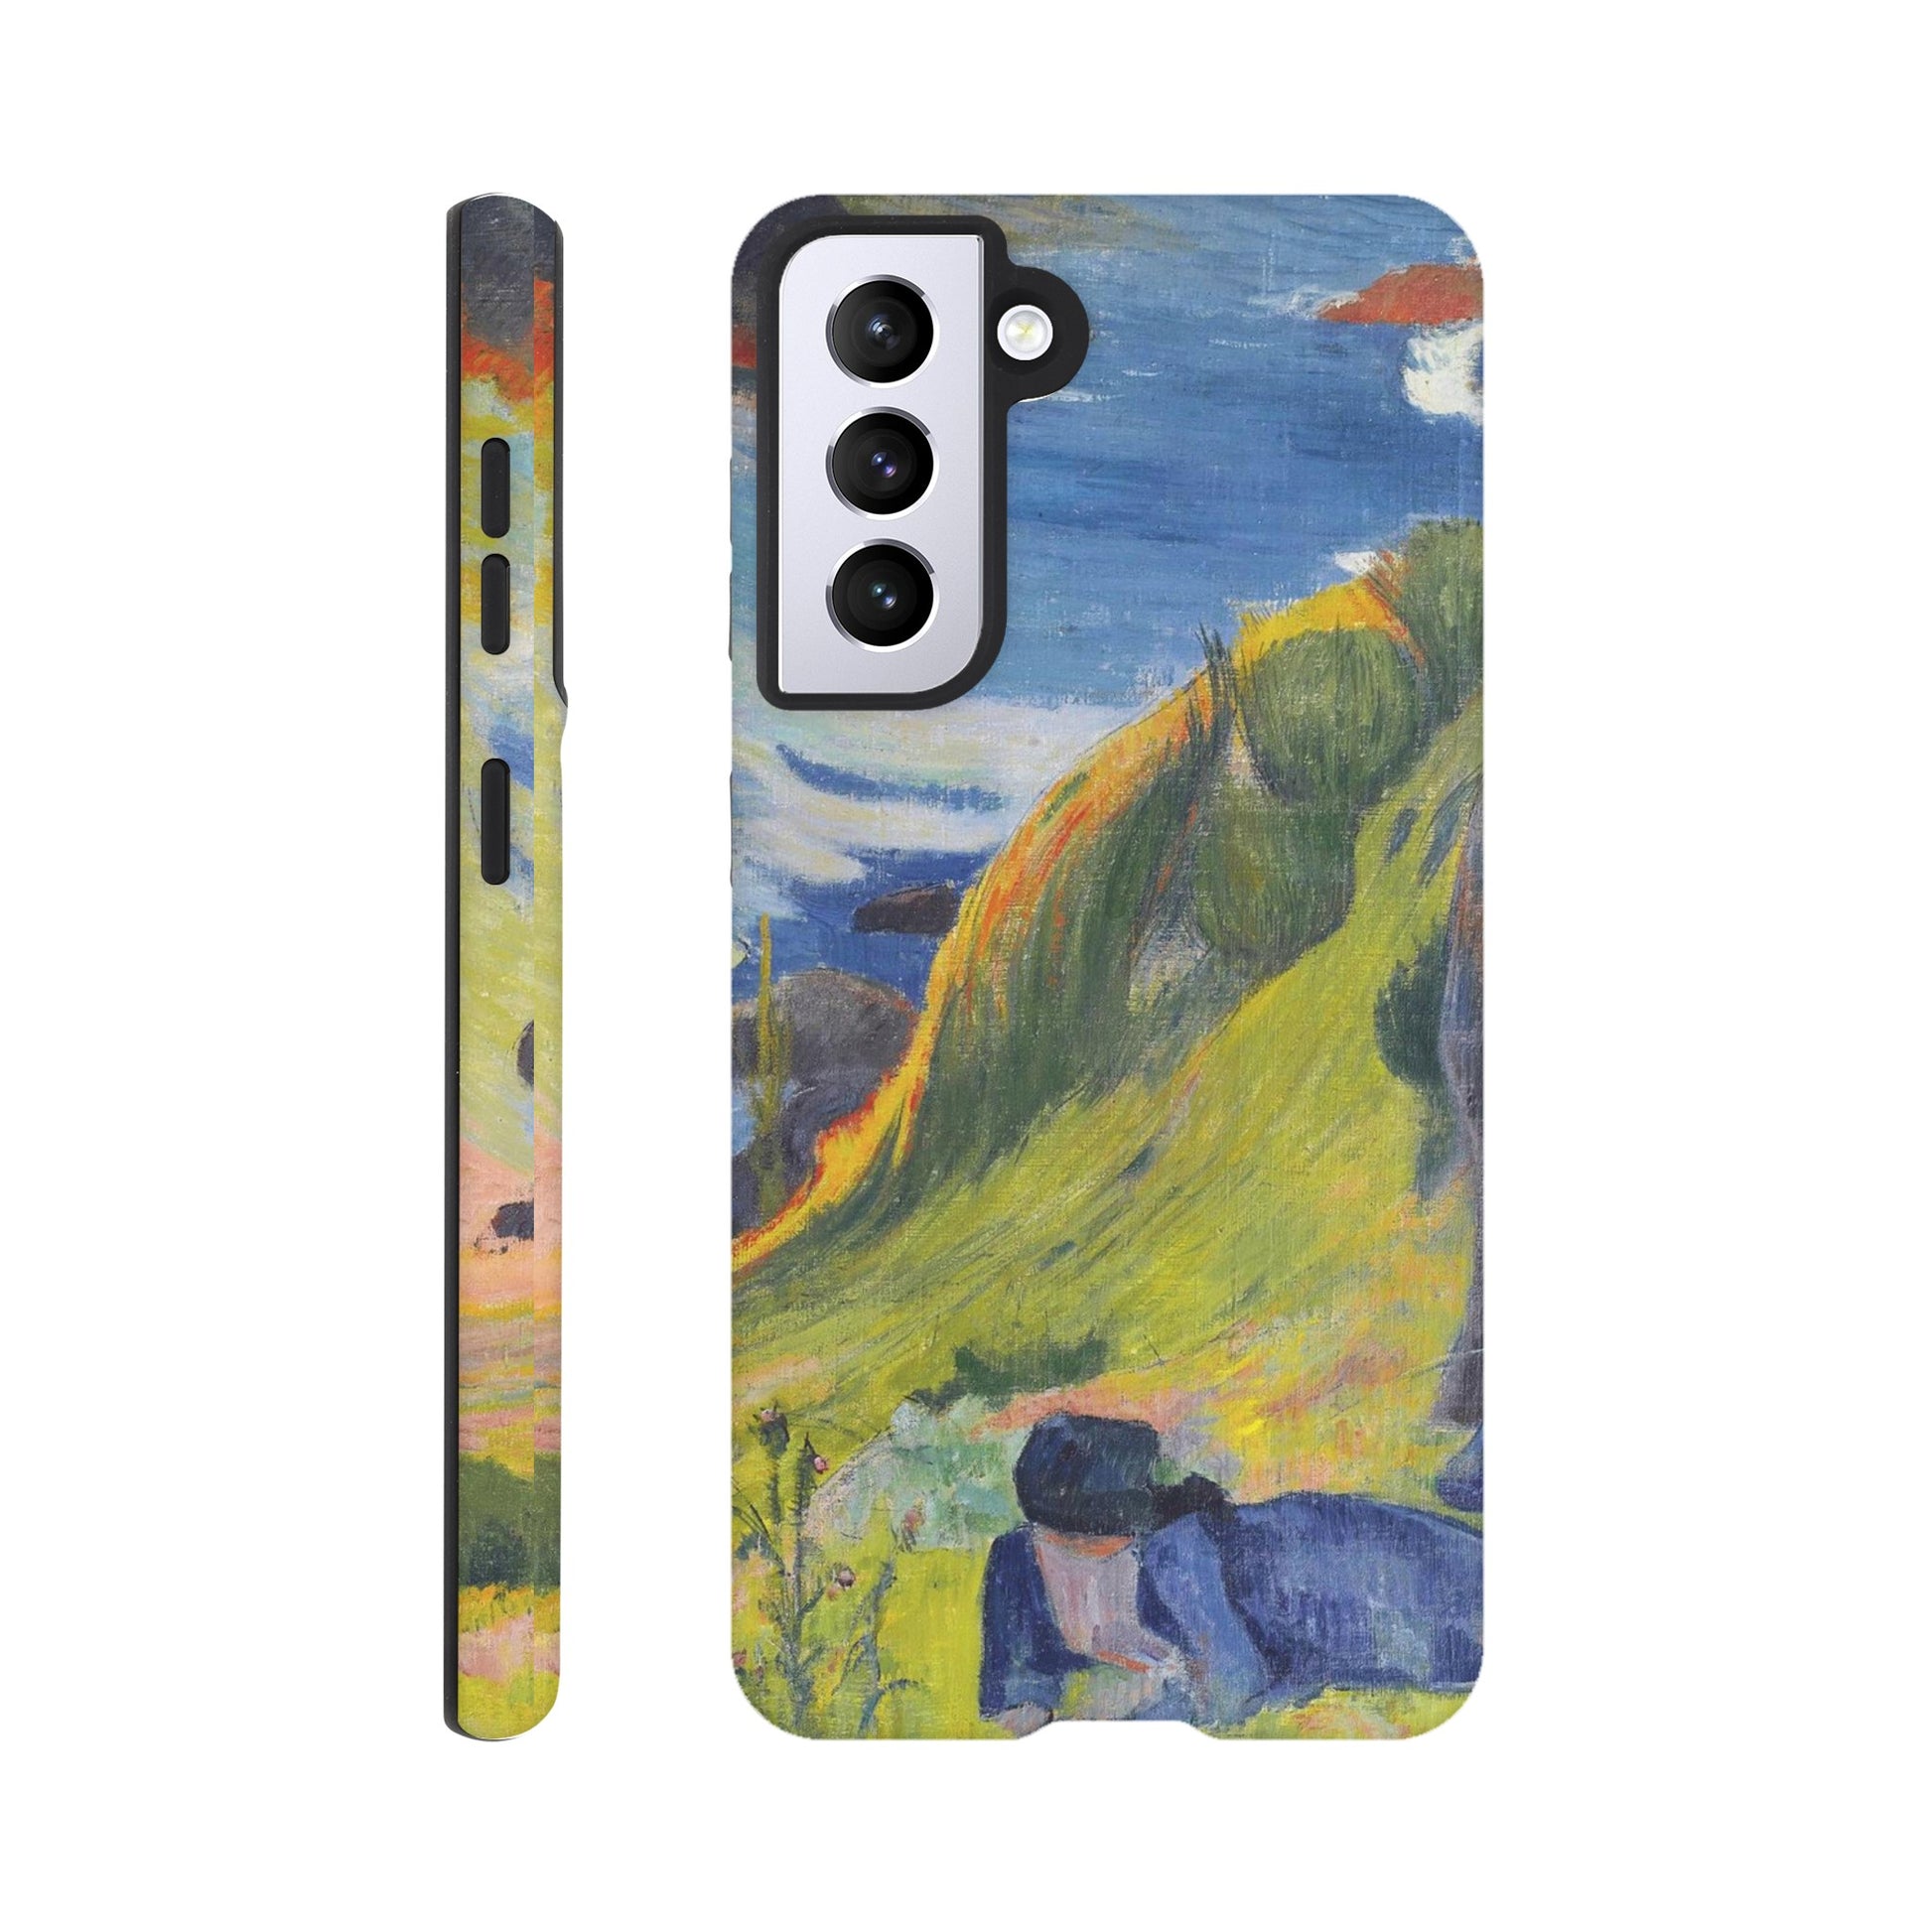 a phone case with a painting of cows in a field